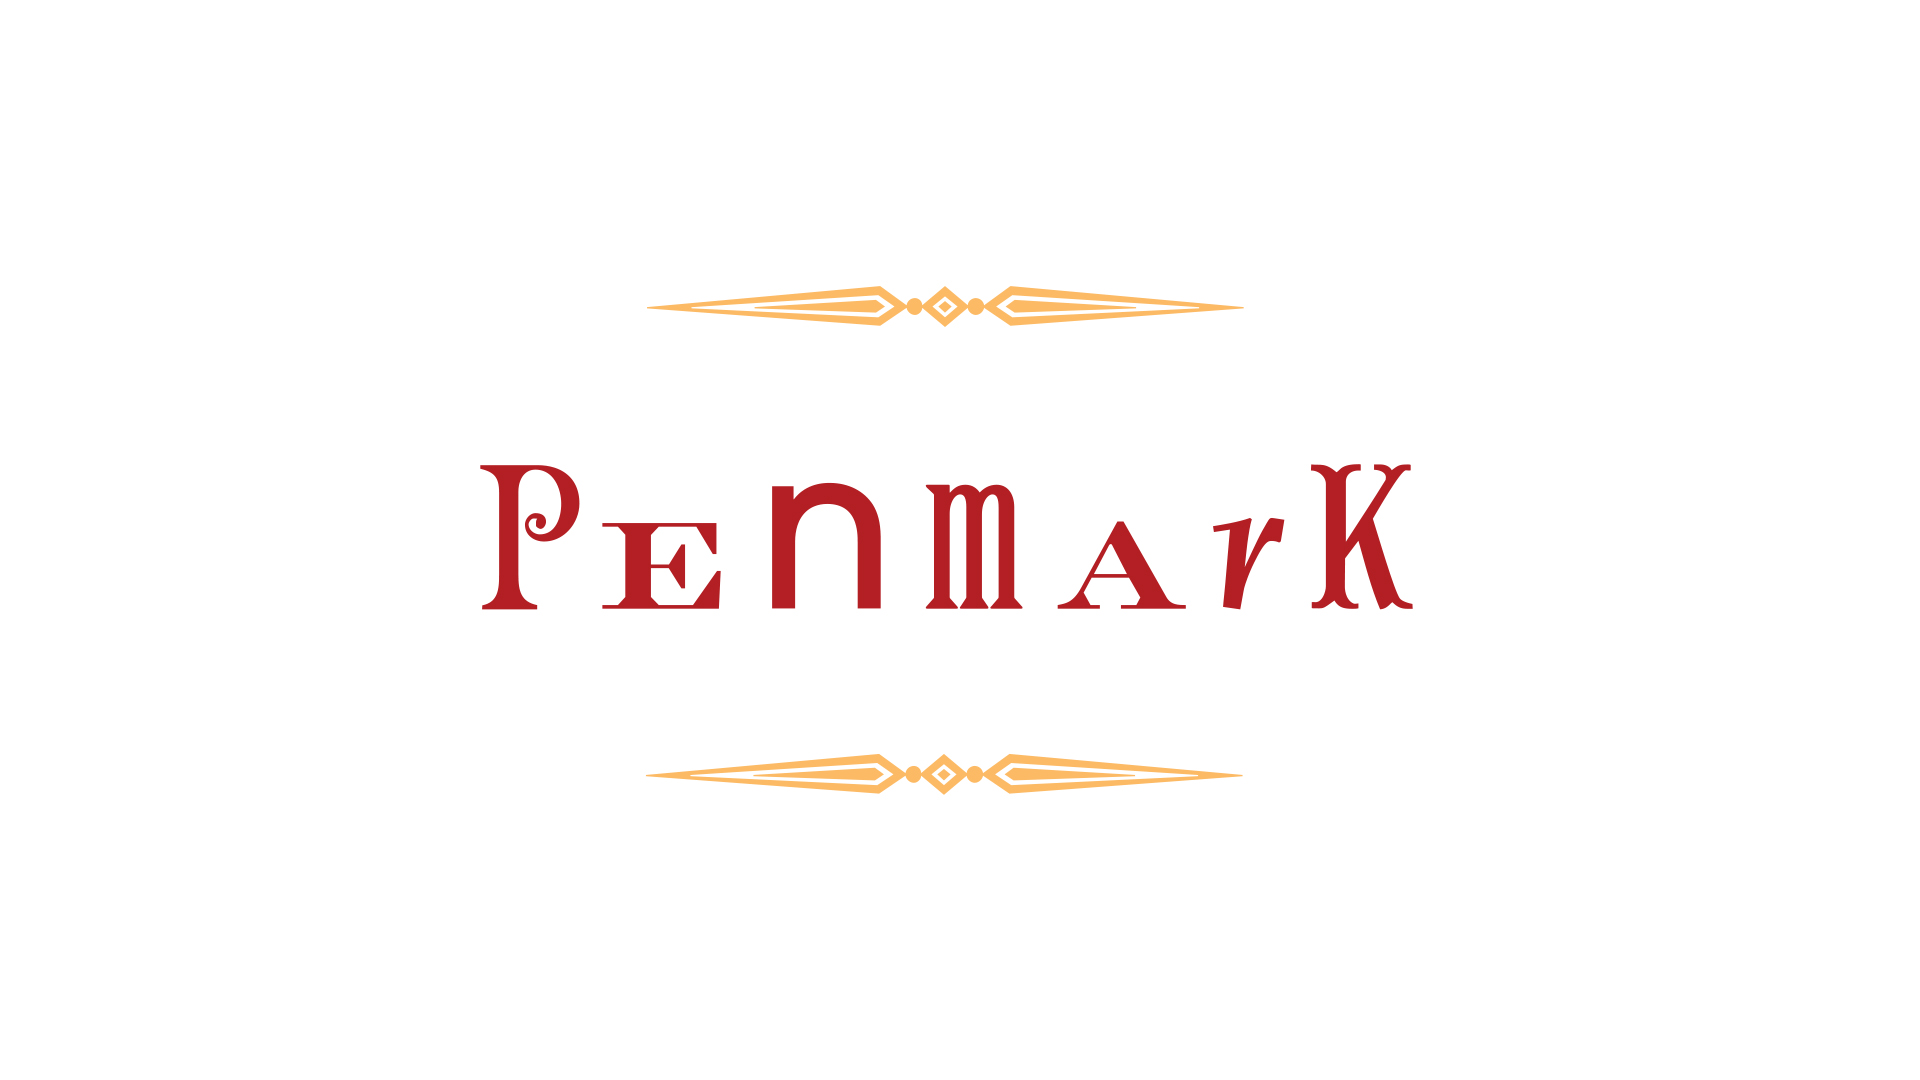 penmark red and yellow logo on white